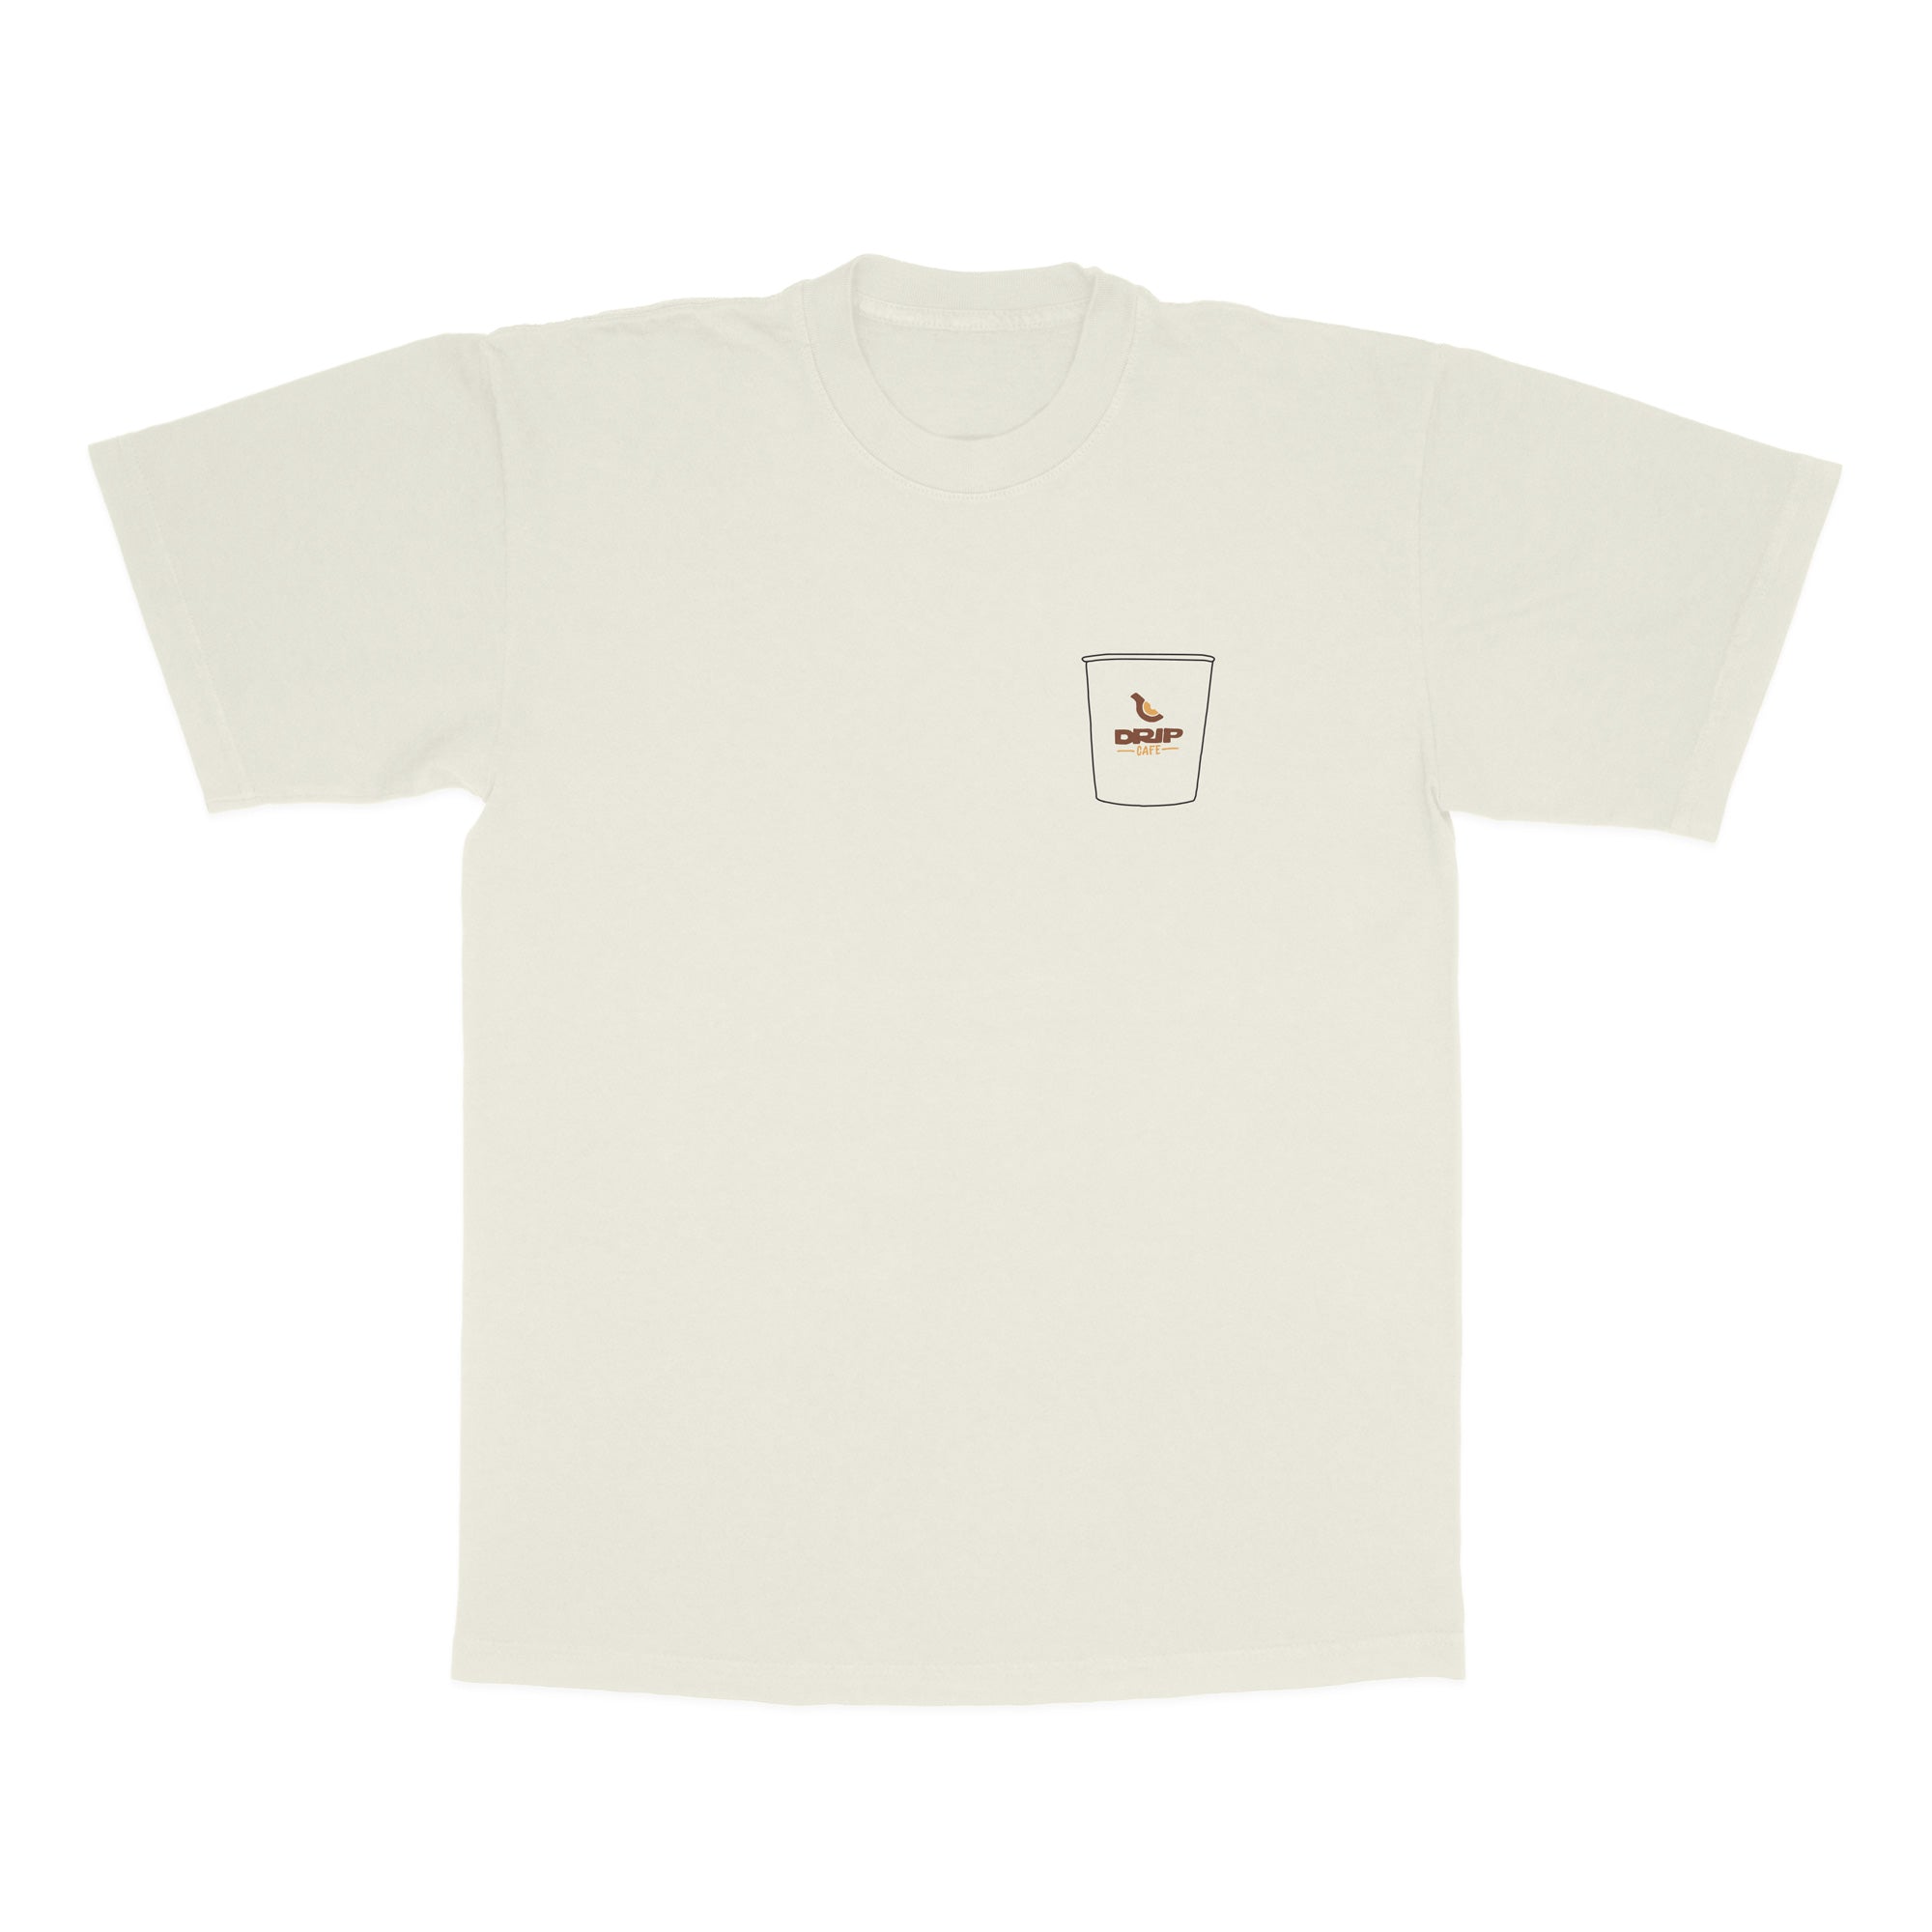 Drip Cafe x AGS Honolulu collab T-shirt - "Serving You"